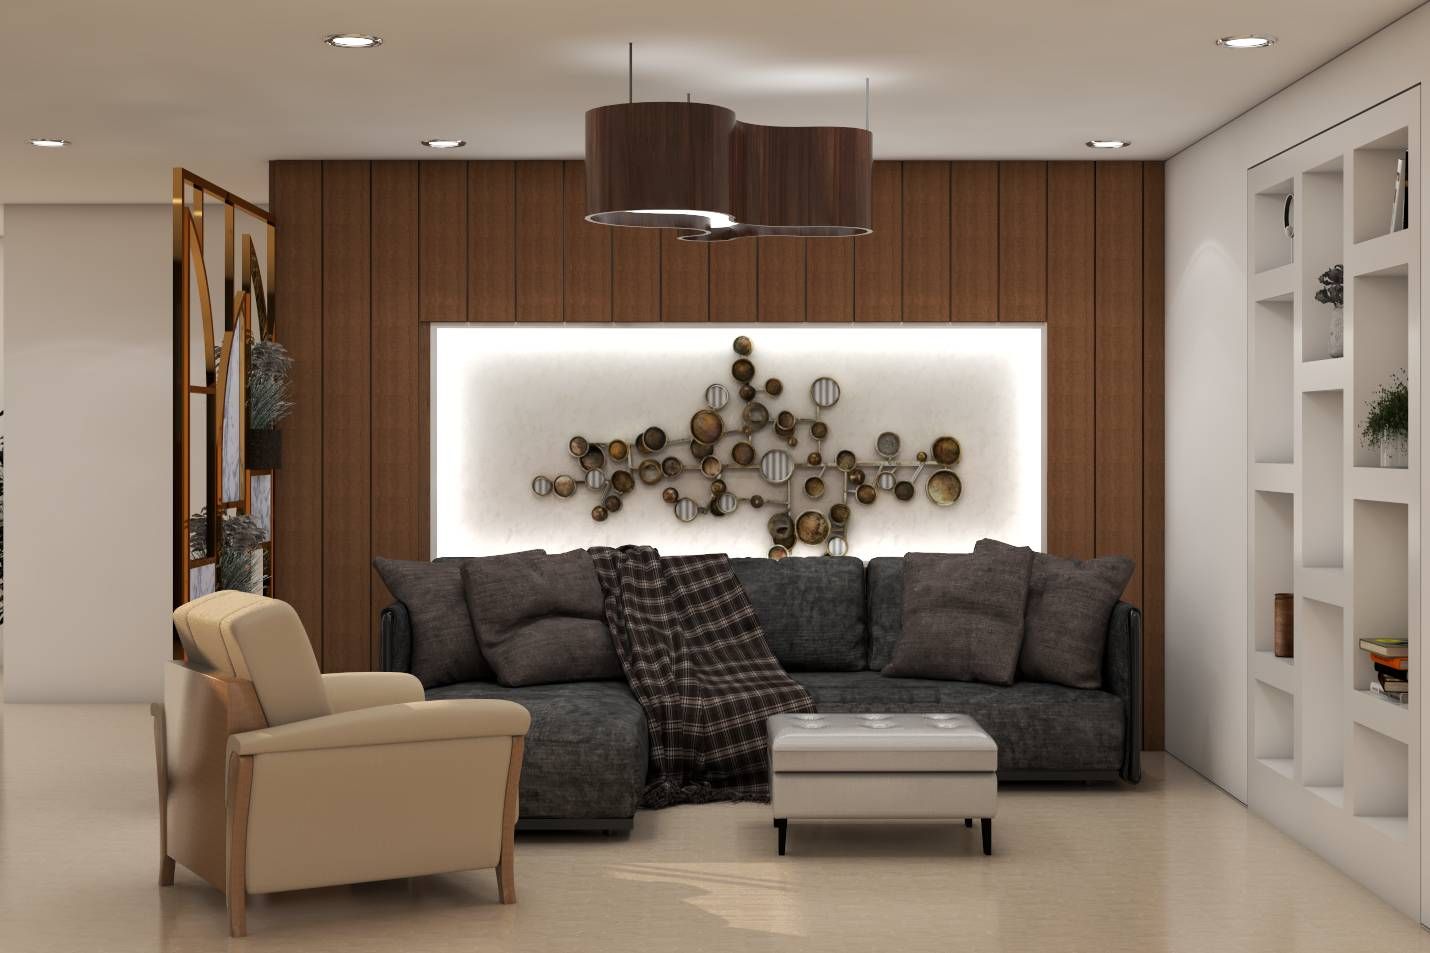 Contemporary Spacious Living Room Design With Wooden Panel